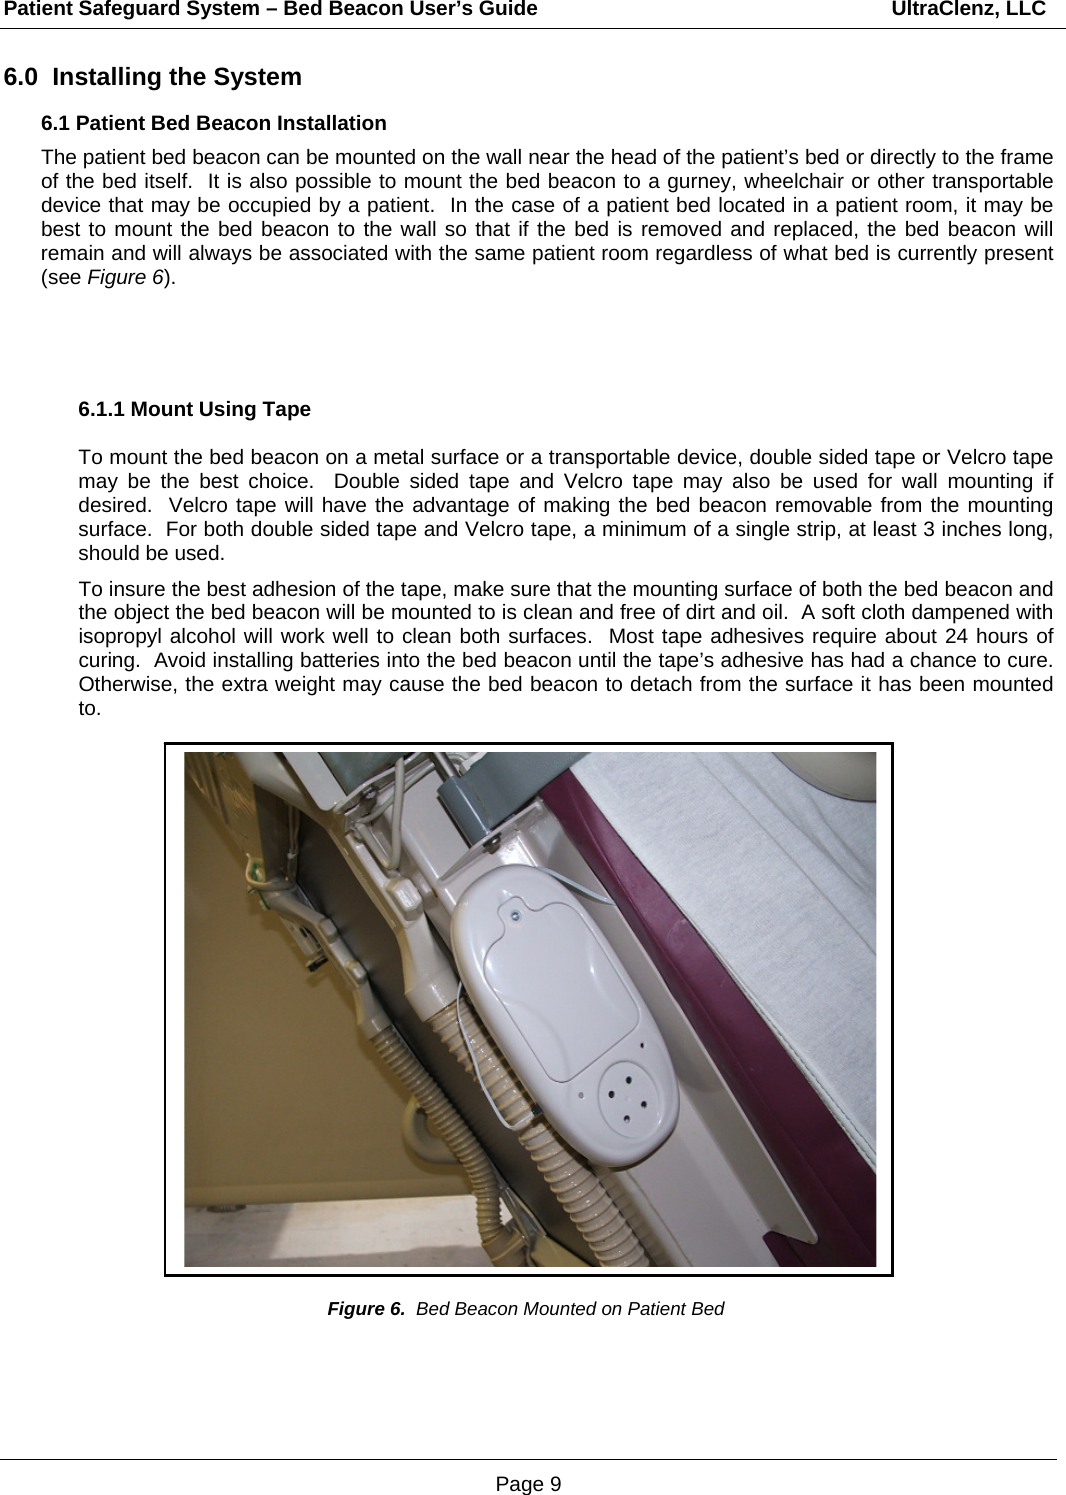 Patient Safeguard System – Bed Beacon User’s Guide                                                             UltraClenz, LLC Page 9 6.0  Installing the System 6.1 Patient Bed Beacon Installation The patient bed beacon can be mounted on the wall near the head of the patient’s bed or directly to the frame of the bed itself.  It is also possible to mount the bed beacon to a gurney, wheelchair or other transportable device that may be occupied by a patient.  In the case of a patient bed located in a patient room, it may be best to mount the bed beacon to the wall so that if the bed is removed and replaced, the bed beacon will remain and will always be associated with the same patient room regardless of what bed is currently present (see Figure 6).      6.1.1 Mount Using Tape  To mount the bed beacon on a metal surface or a transportable device, double sided tape or Velcro tape may be the best choice.  Double sided tape and Velcro tape may also be used for wall mounting if desired.  Velcro tape will have the advantage of making the bed beacon removable from the mounting surface.  For both double sided tape and Velcro tape, a minimum of a single strip, at least 3 inches long, should be used.    To insure the best adhesion of the tape, make sure that the mounting surface of both the bed beacon and the object the bed beacon will be mounted to is clean and free of dirt and oil.  A soft cloth dampened with isopropyl alcohol will work well to clean both surfaces.  Most tape adhesives require about 24 hours of curing.  Avoid installing batteries into the bed beacon until the tape’s adhesive has had a chance to cure.  Otherwise, the extra weight may cause the bed beacon to detach from the surface it has been mounted to.                               Figure 6.  Bed Beacon Mounted on Patient Bed 